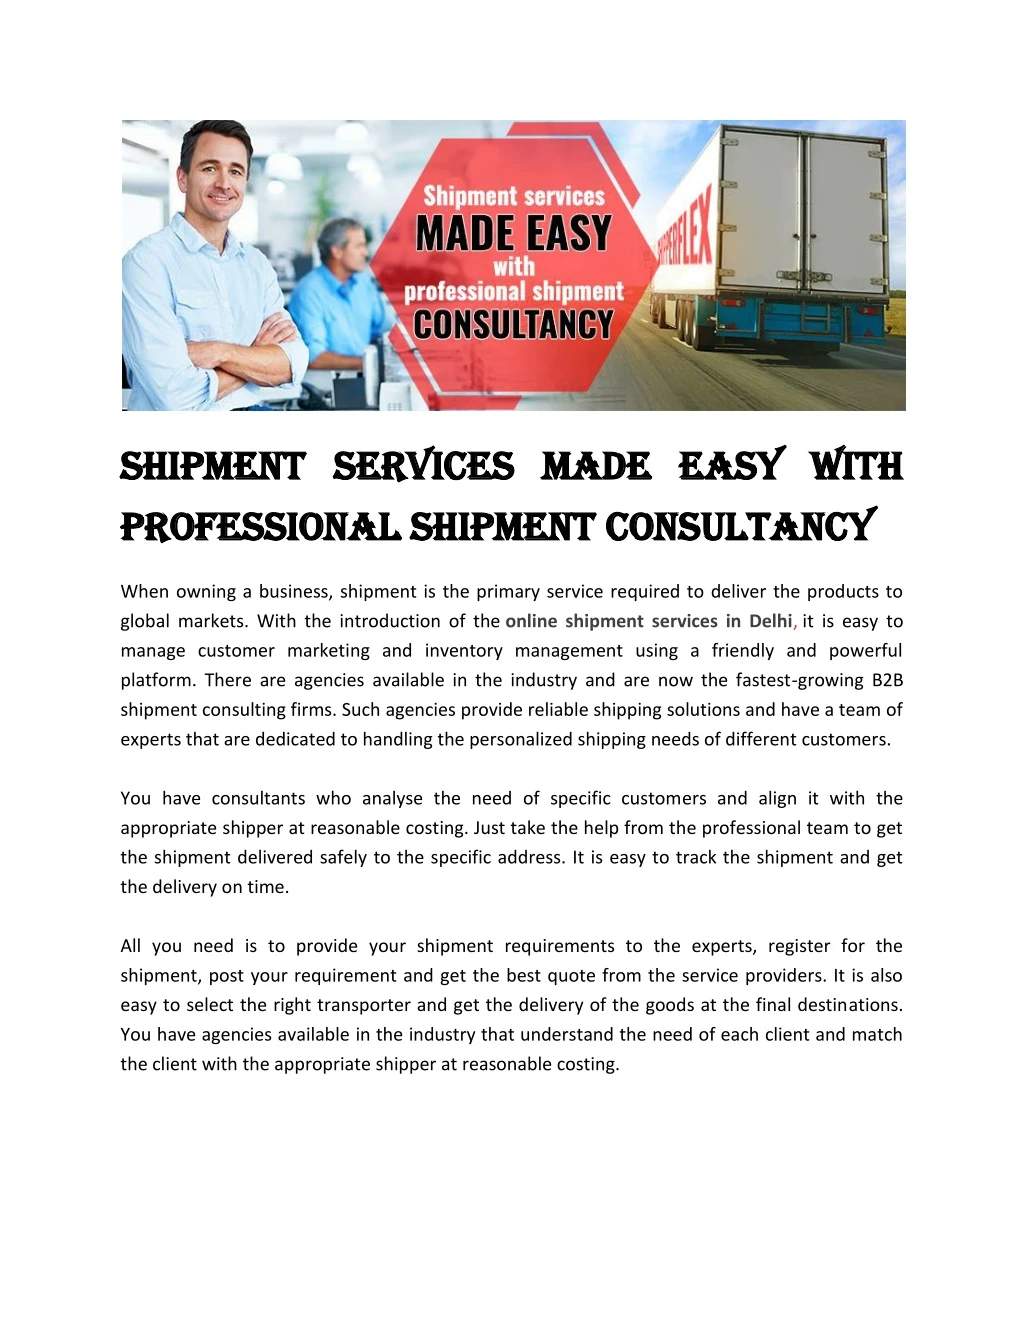 shipment services made easy with shipment